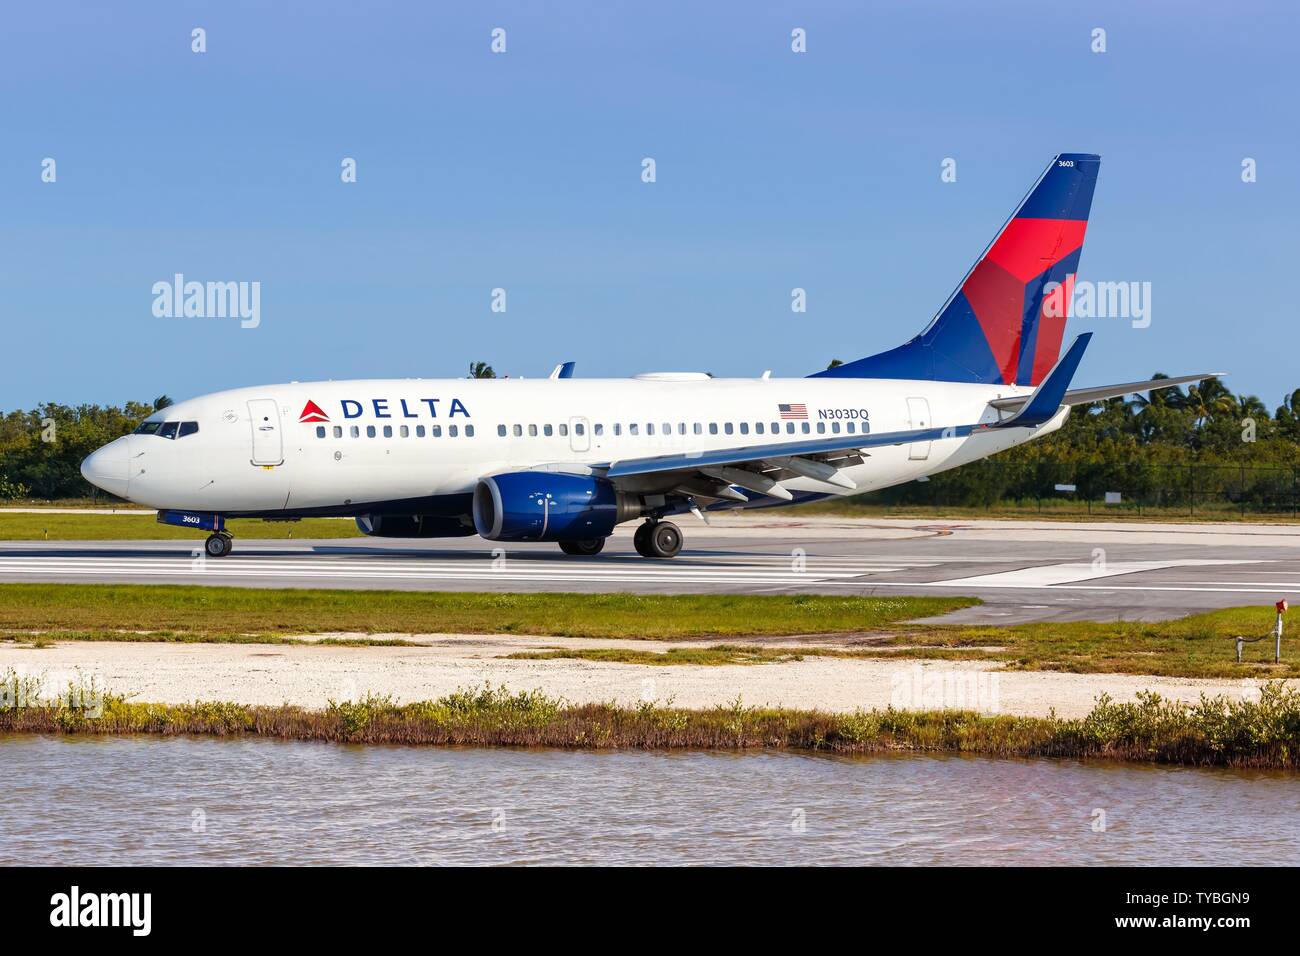 Key West, United States – April 4, 2019: Delta Air Lines Boeing 737-700 airplane at Key West airport (EYW) in the United States. | usage worldwide Stock Photo